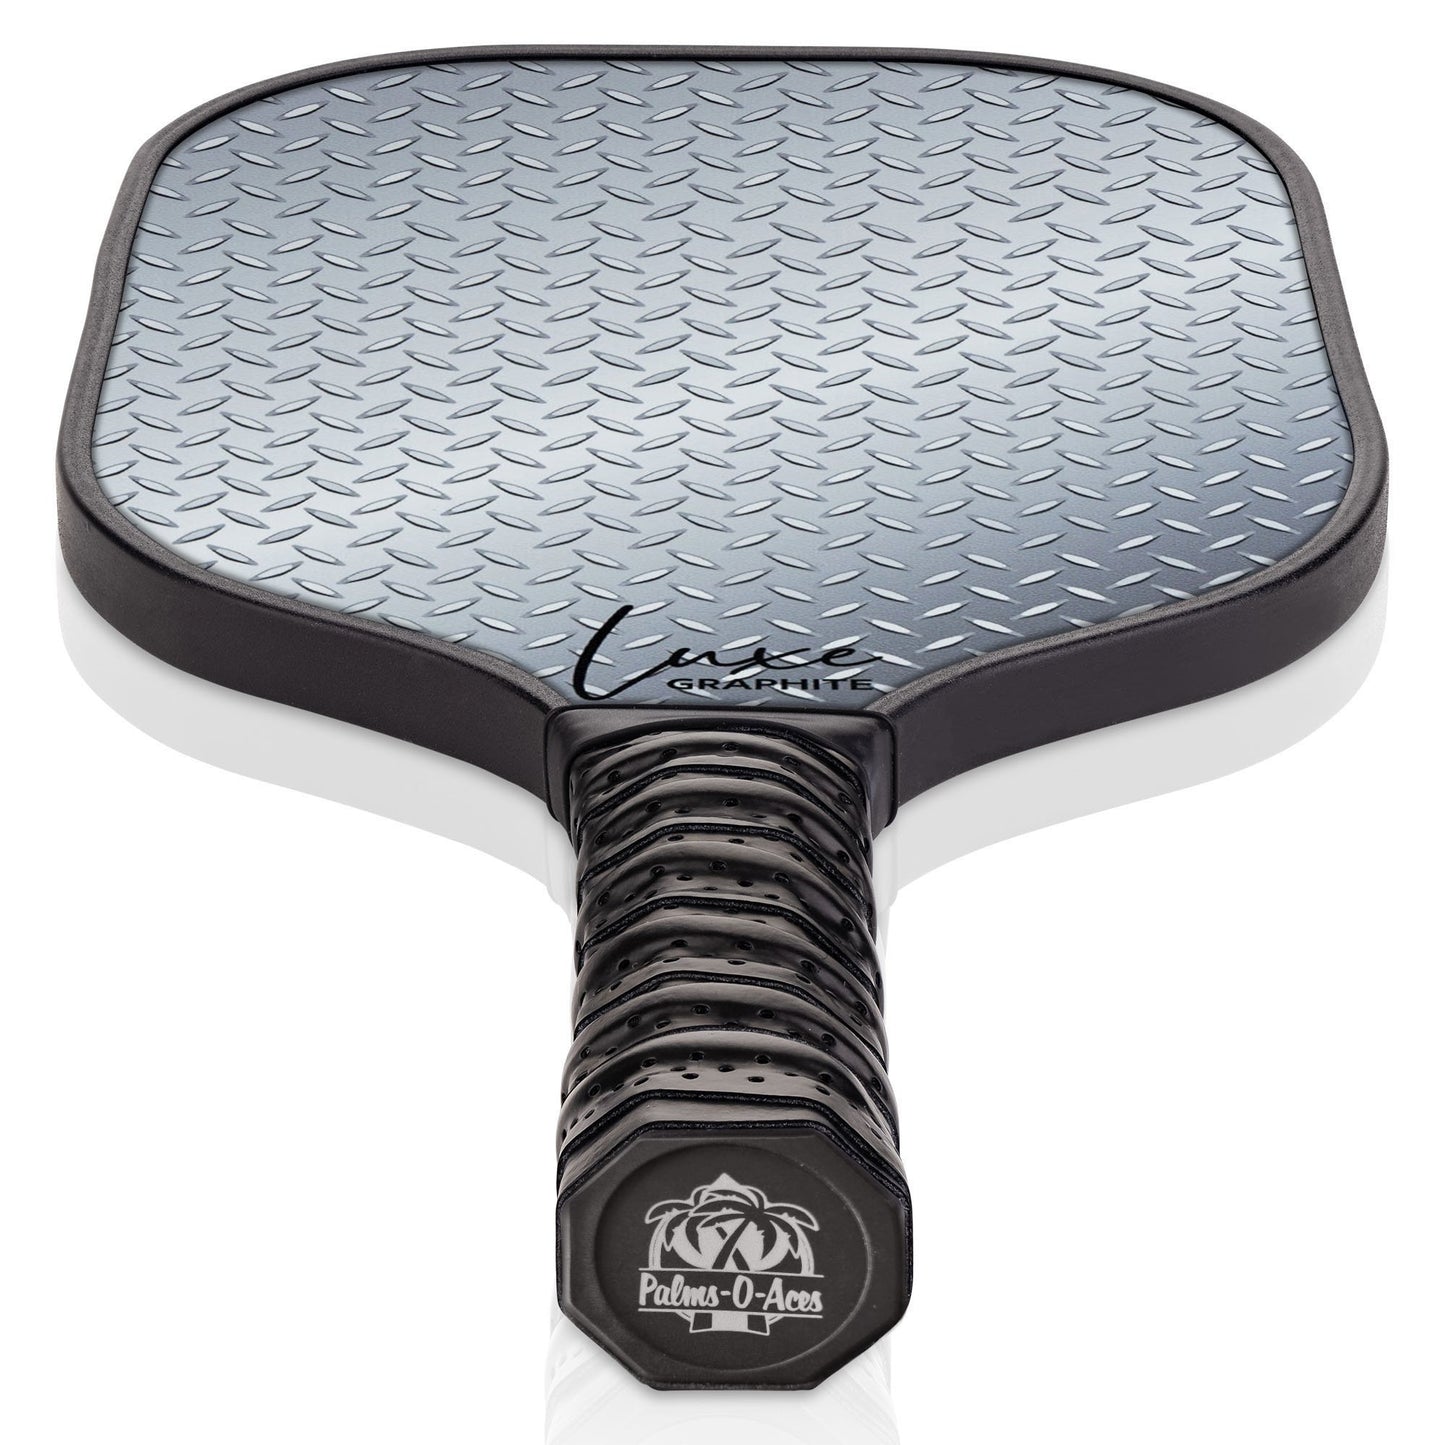 Steel Plated Luxe Graphite Pickleball Paddle with Cover - Palms-O-Aces